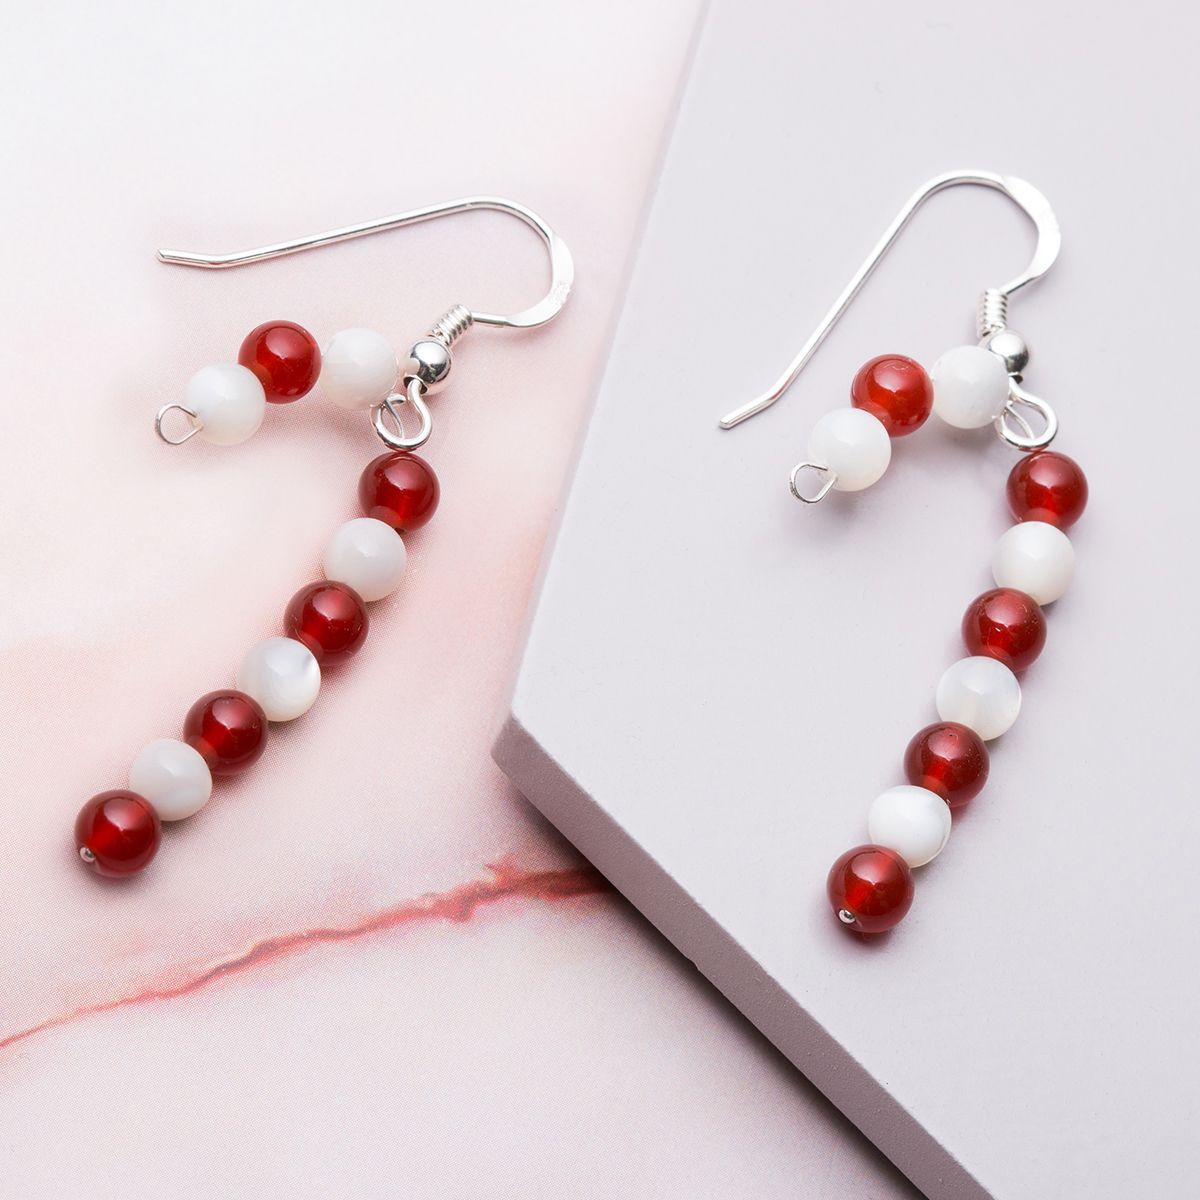 Candy Cane Earring Kit